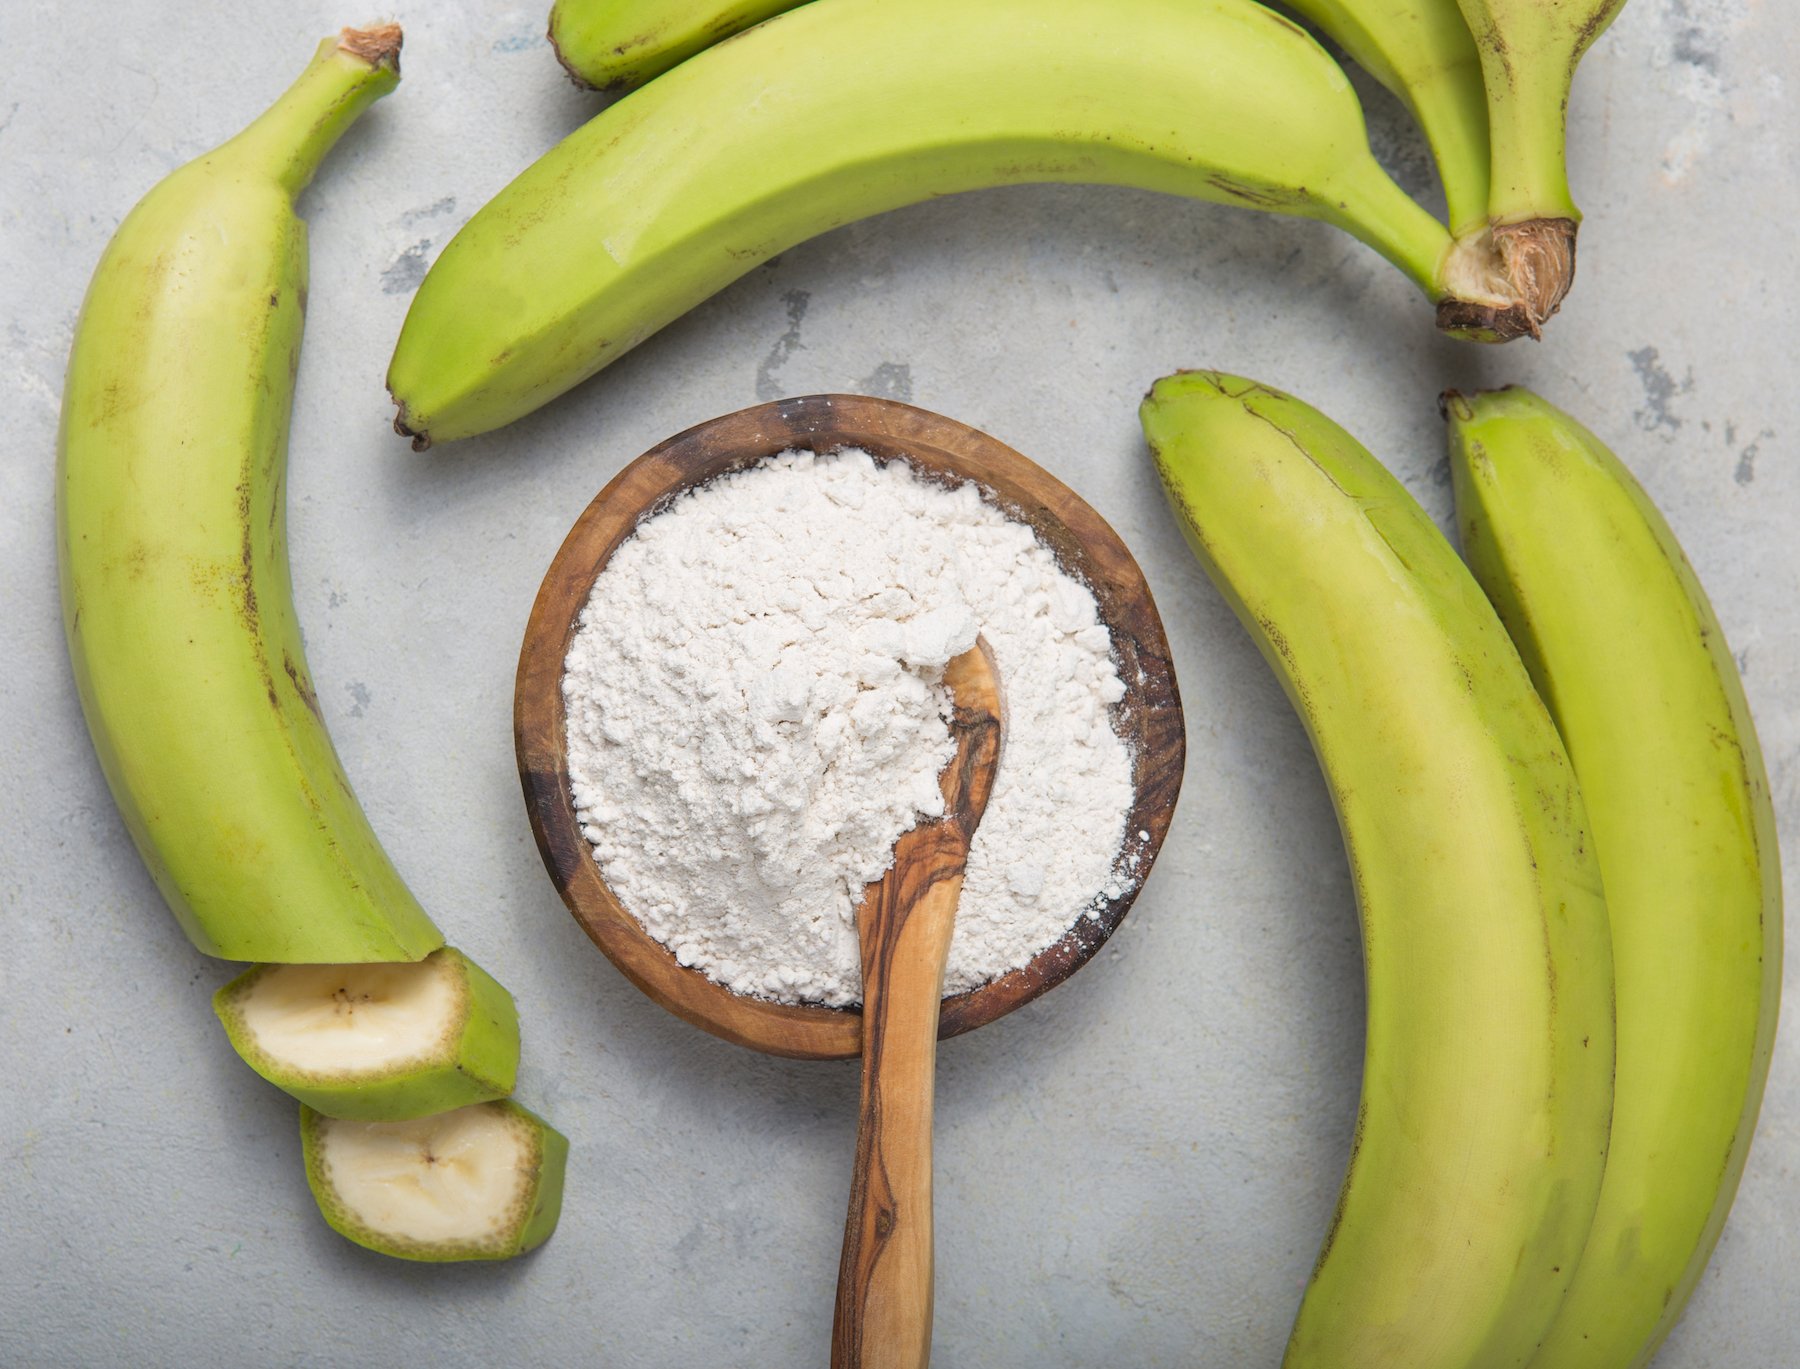 What is resistant starch and how does it impact glucose?